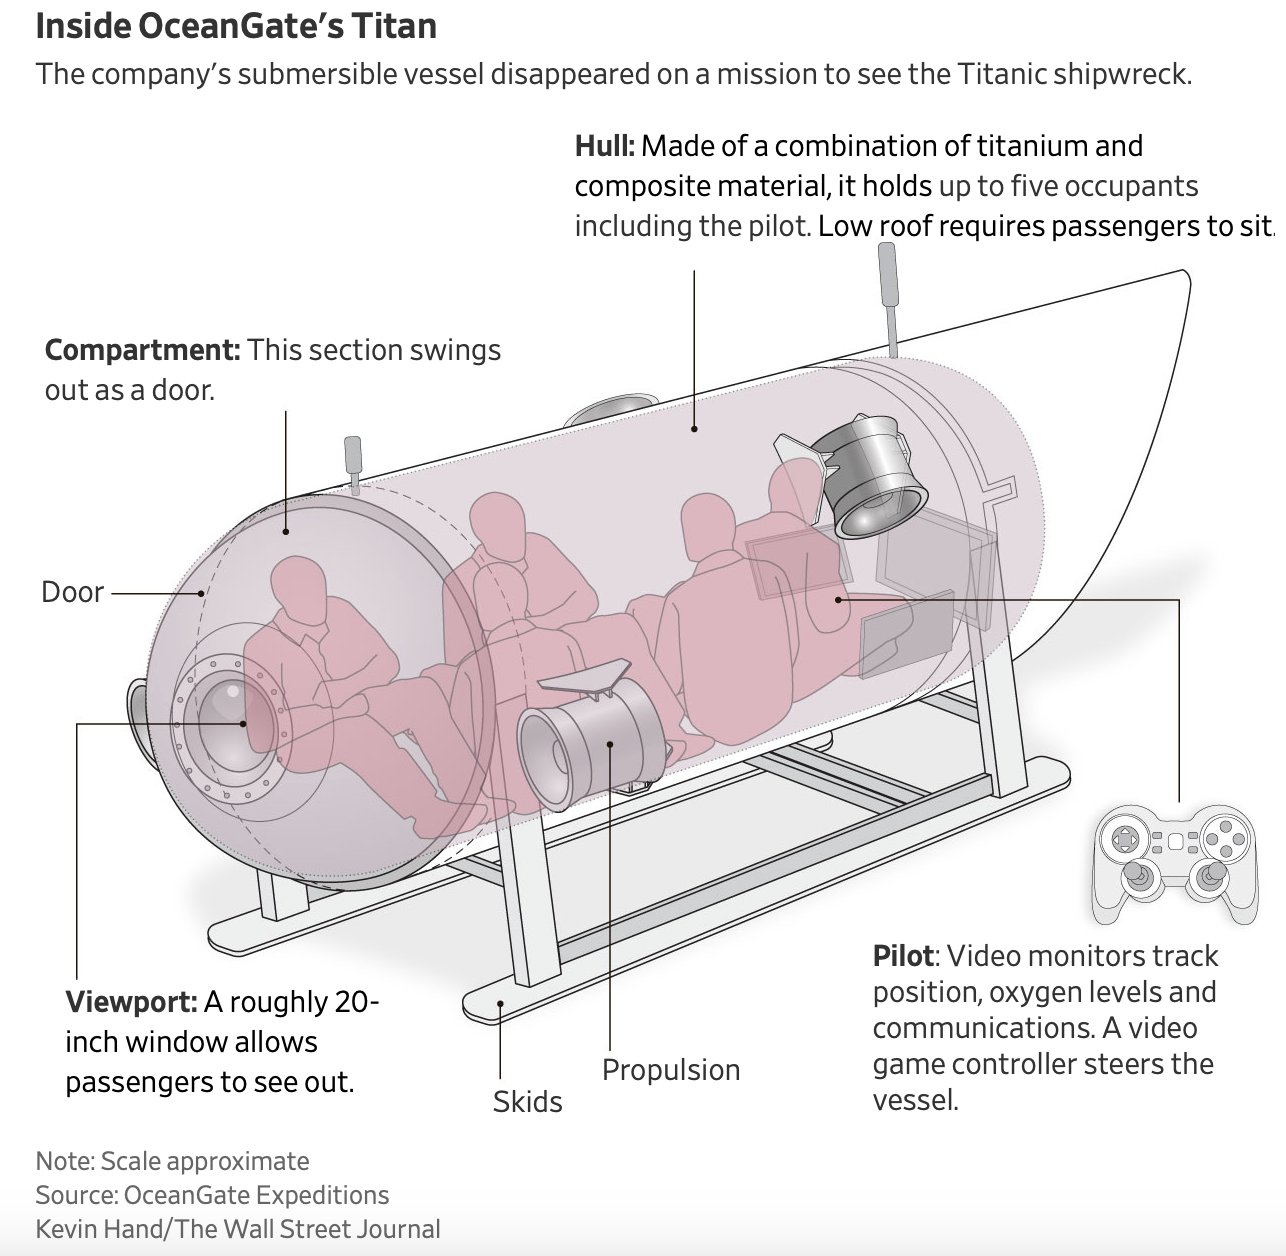 Rescuers shifted their search for a missing submersible to an area where Canadian aircraft detected banging noises underwater, officials said Wednesday, as the clock ticked down in the race to find the crew that was headed to the Titanic shipwreck. The U.S. Coast Guard said Navy analysts haven’t determined the source of the noises, which were heard on Tuesday and on Wednesday morning. “We don’t know what they are, to be frank with you,” Capt. Jamie Frederick of the First Coast Guard District said Wednesday afternoon. The Coast Guard said there are five surface assets and two remotely operated vehicles currently searching in the area the noises came from, with more arriving in the coming day. “Although the ROV searches have yielded negative results, they continue,” Frederick said. Inside OceanGate's Titan The company's submersible vessel disappeared on a mission to see the Titanic shipwreck. Hull: Made of a combination of titanium and composite material, it holds up to five occupants including the pilot. Low roof requires passengers to sit. Compartment: This section swings out as a door. Door Pilot: Video monitors track position, oxygen levels and communications. A video game controller steers the vessel. Viewport: A roughly 20-inch window allows passengers to see out. Propulsion Skids Note: Scale approximate Source: OceanGate Expeditions Kevin Hand/The Wall Street Journal The banging sounds offered a dash of hope during an extensive search in a remote part of the North Atlantic. The world has watched as international crews have combed an area twice the size of Connecticut for a roughly 22-foot-long submersible that disappeared Sunday on a trip to the Titanic shipwreck, which is more than 2 miles underwater. The search area has expanded by the hour because of weather conditions and ocean currents, Frederick said.